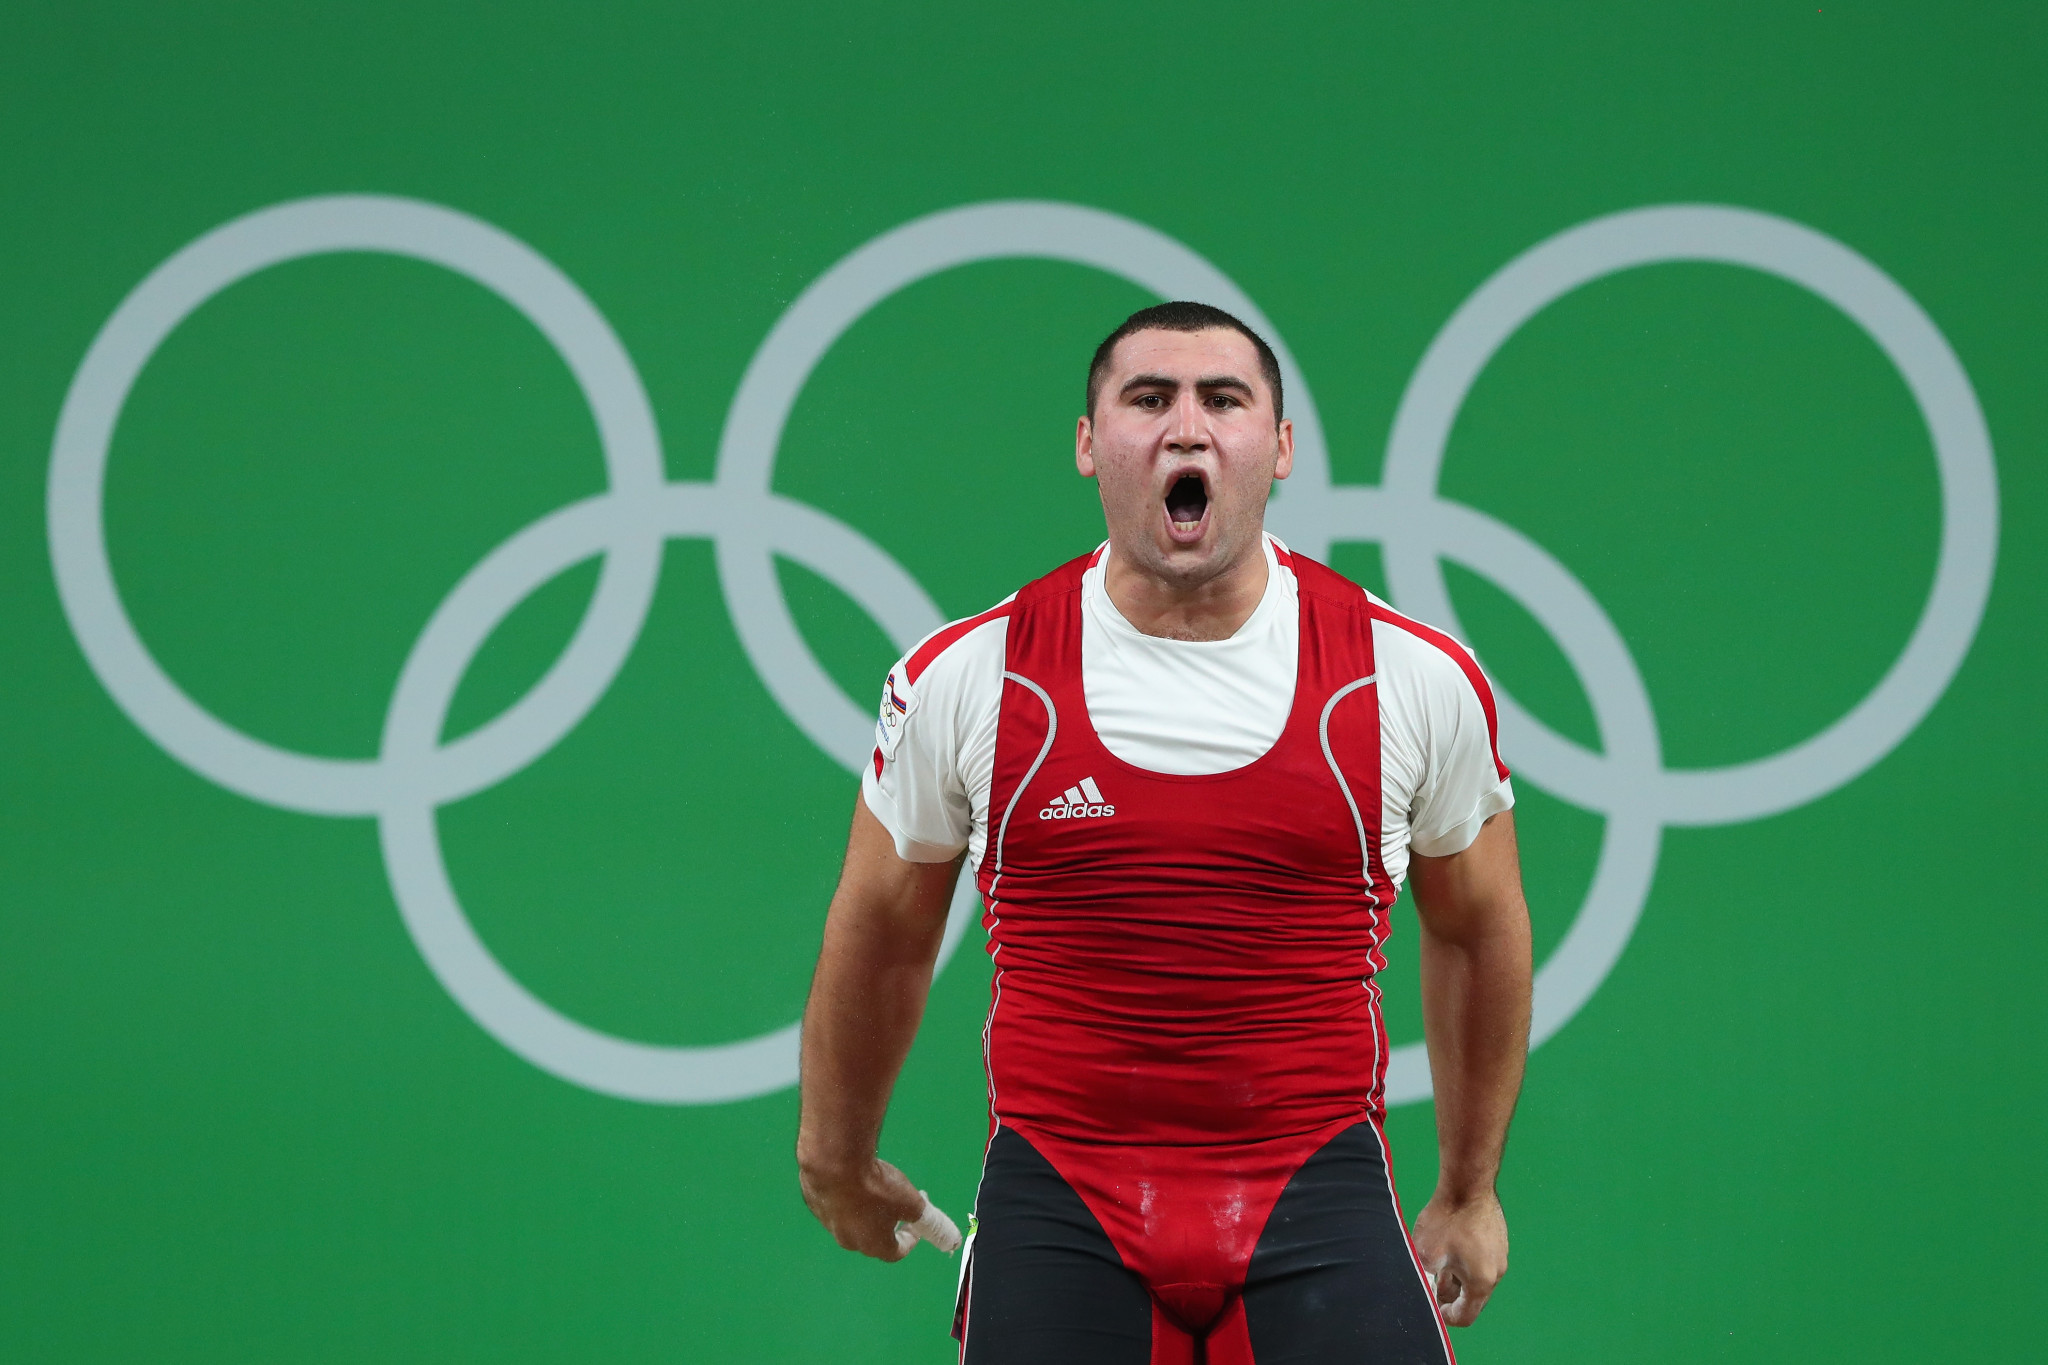 Despite today's disappointment, Simon Martirosyan is still in a good position to qualify for the Olympics ©Getty Images